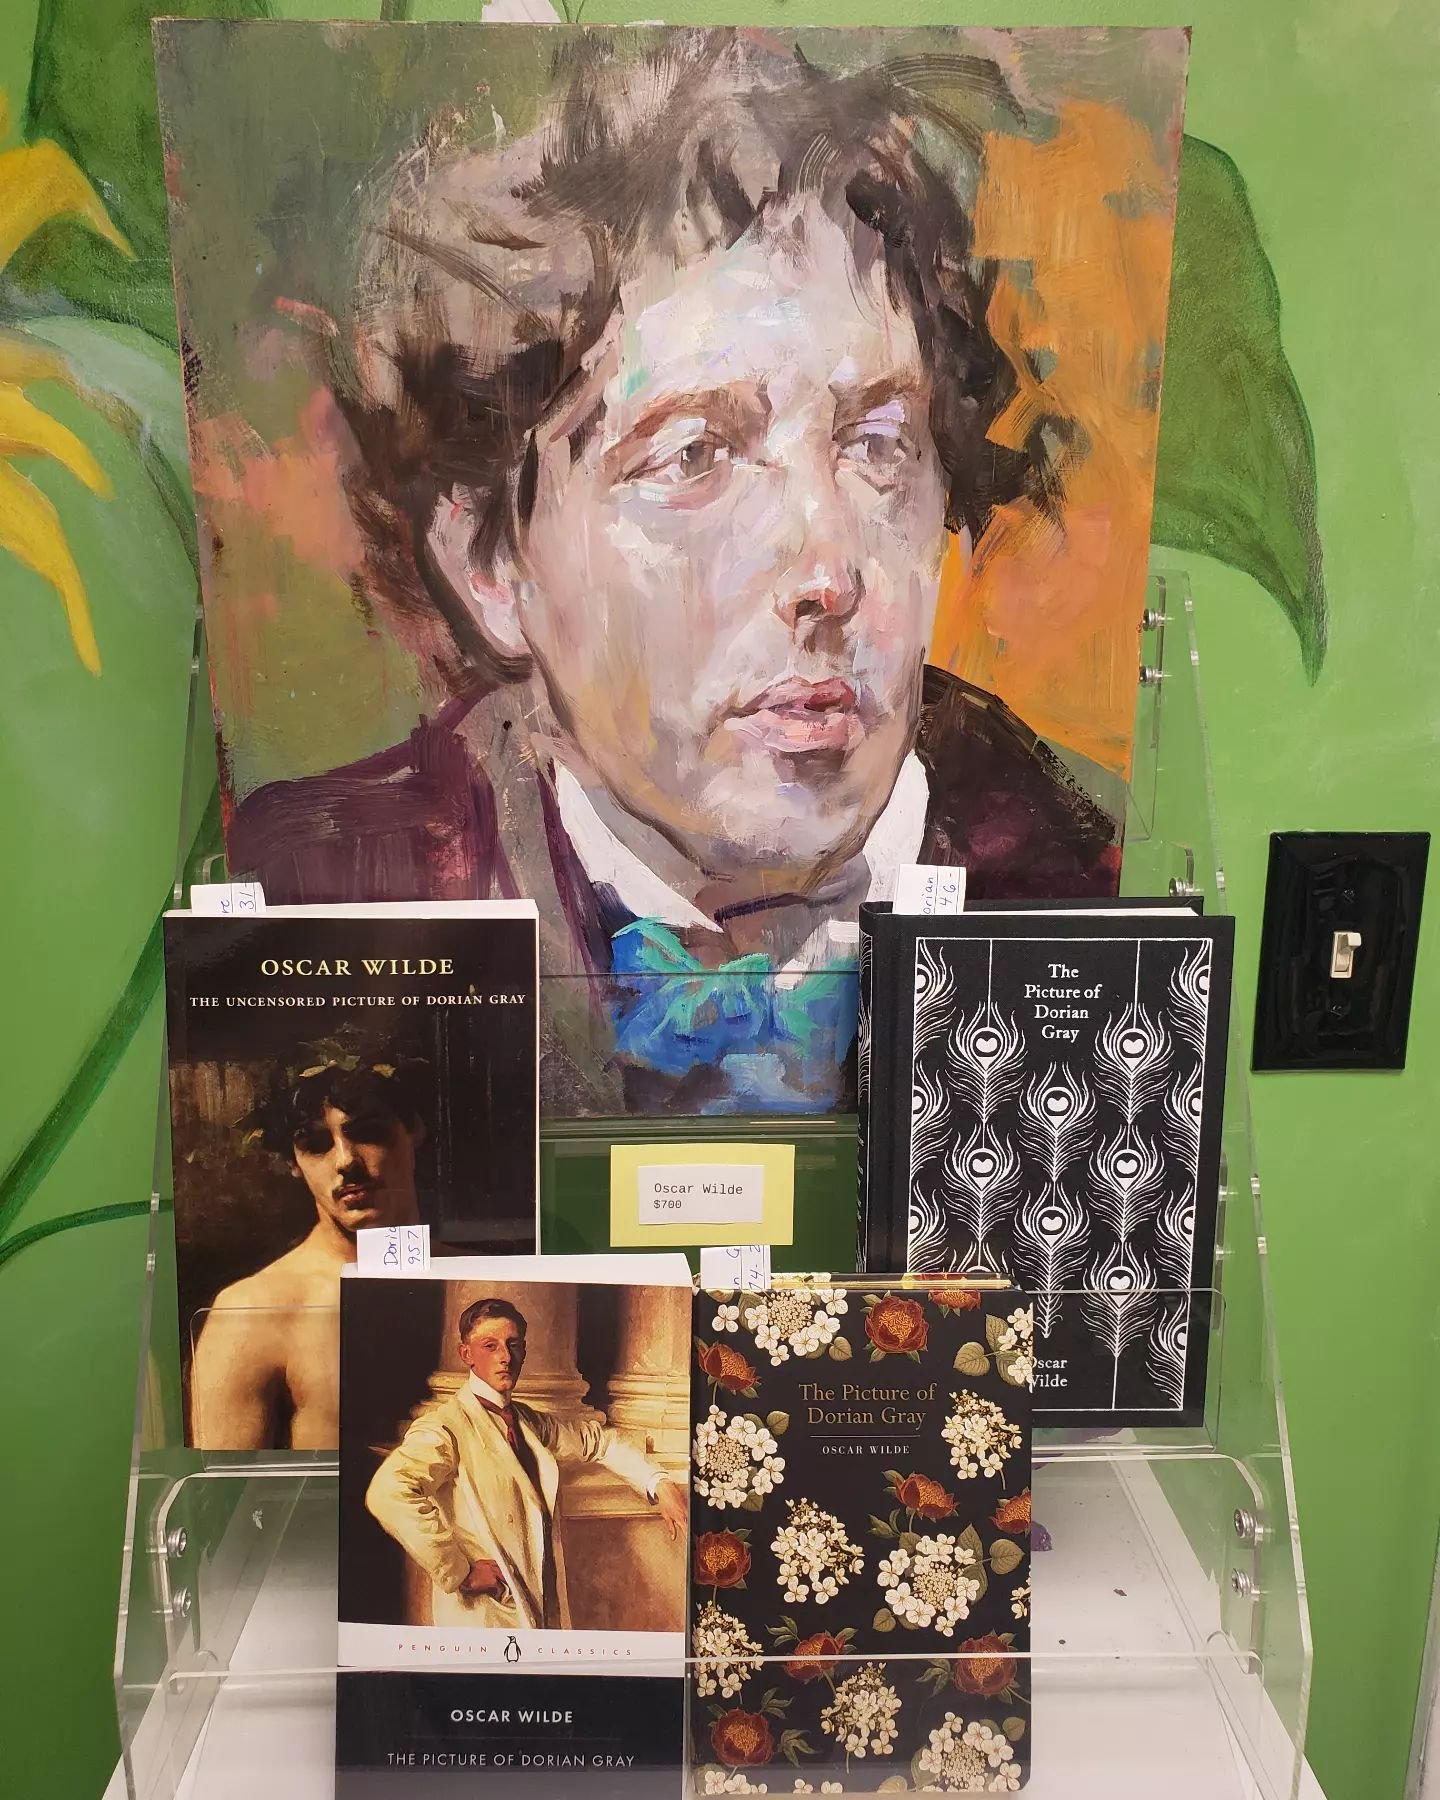 Mathew McFarren's marvelous new author portrait, Irish author, poet and playwright Oscar Wilde. We've got several copies of his masterpiece The Picture of Dorian Gray, including &quot;The Uncensored Picture of Dorian Gray&quot; which  restores materi